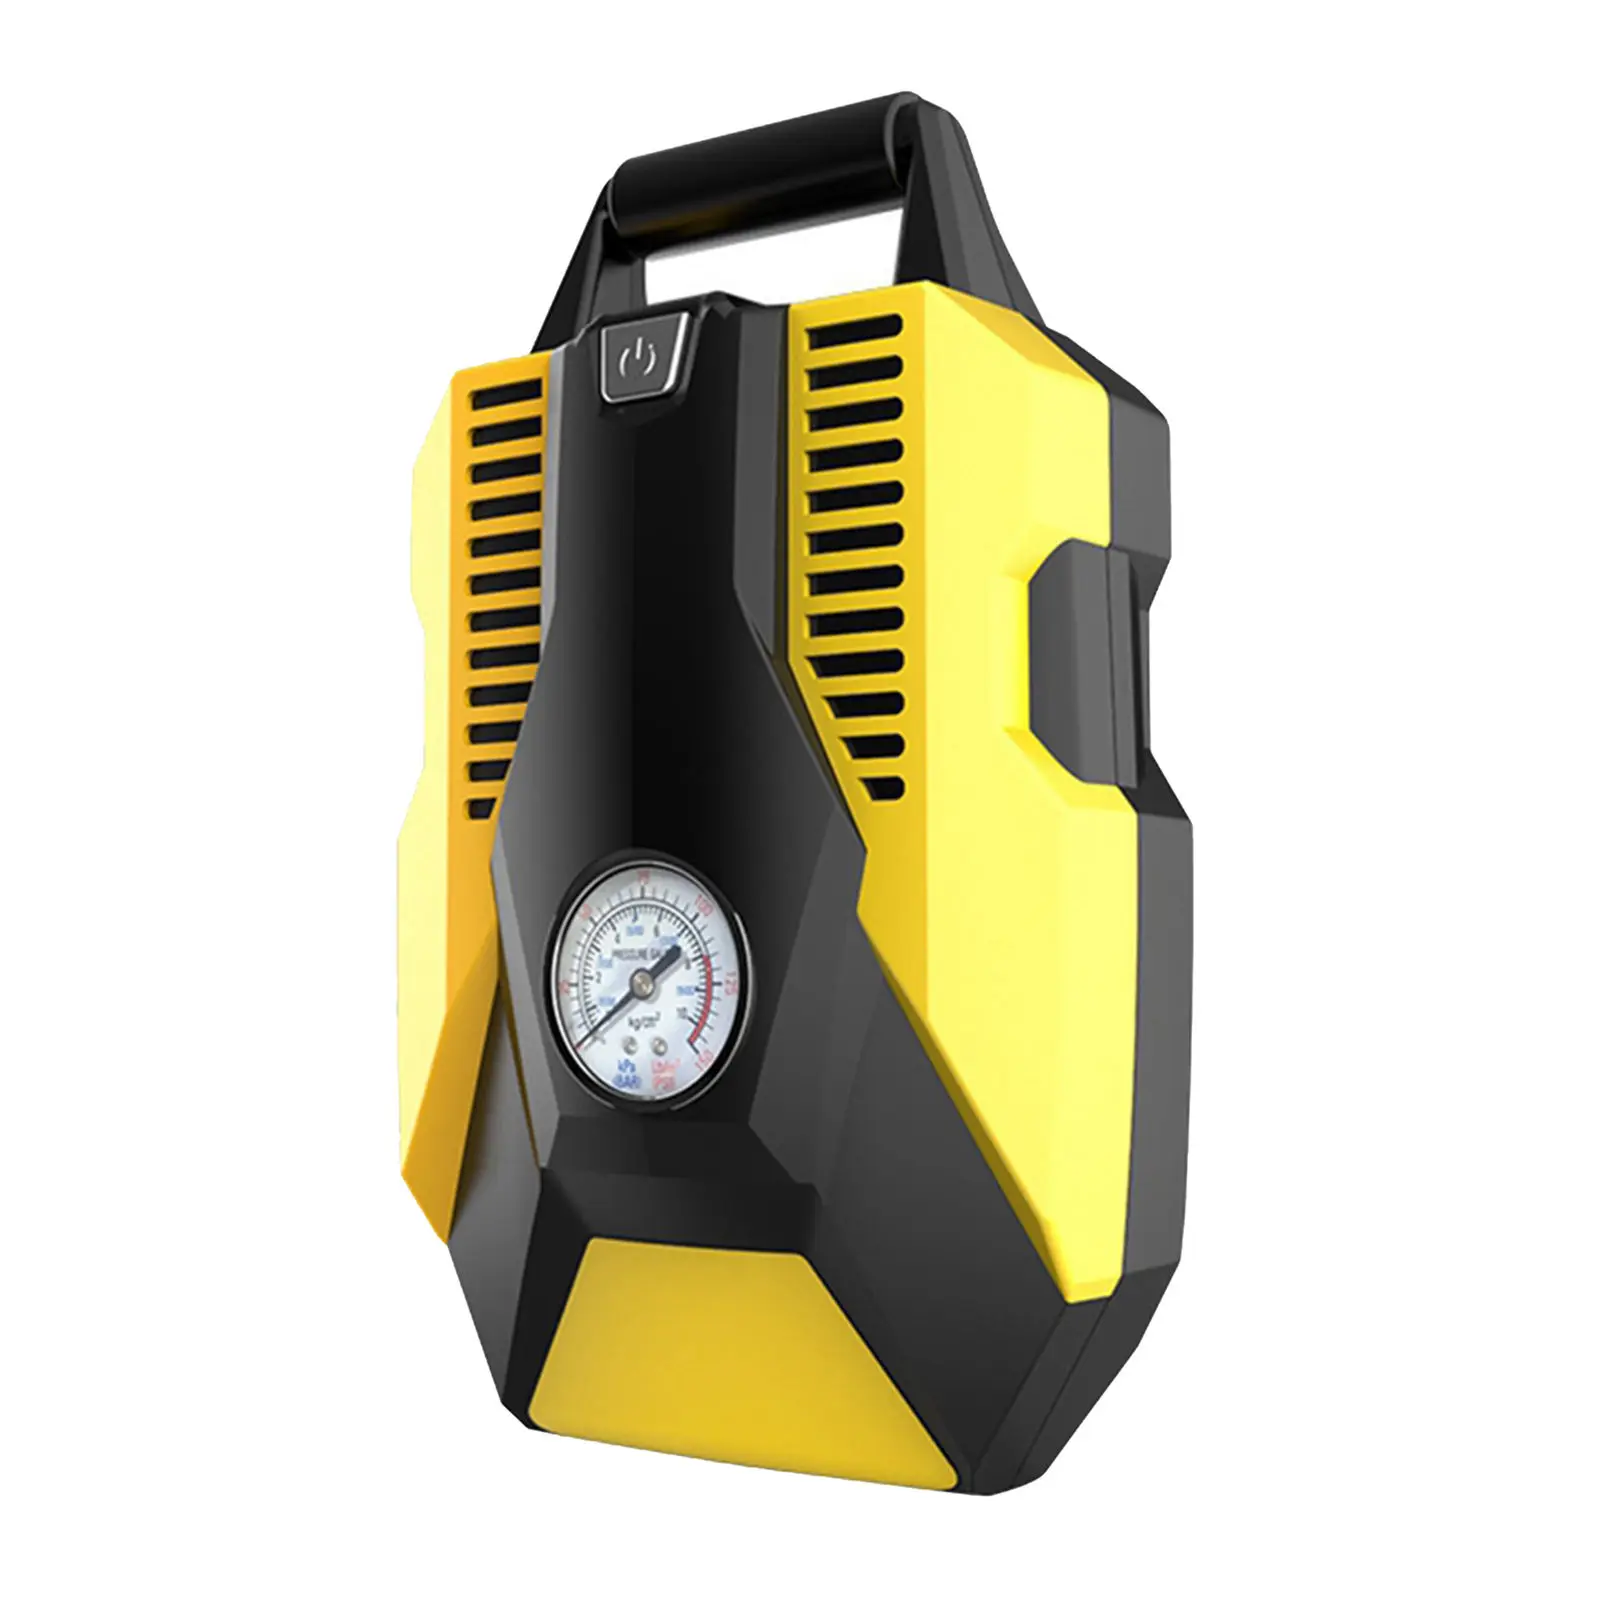 Tyre Inflator, 12V 150PSI Digital Air Compressor Tyre Pump with Larger Air Flow, 2 Nozzle Adaptors, Bright LED Light